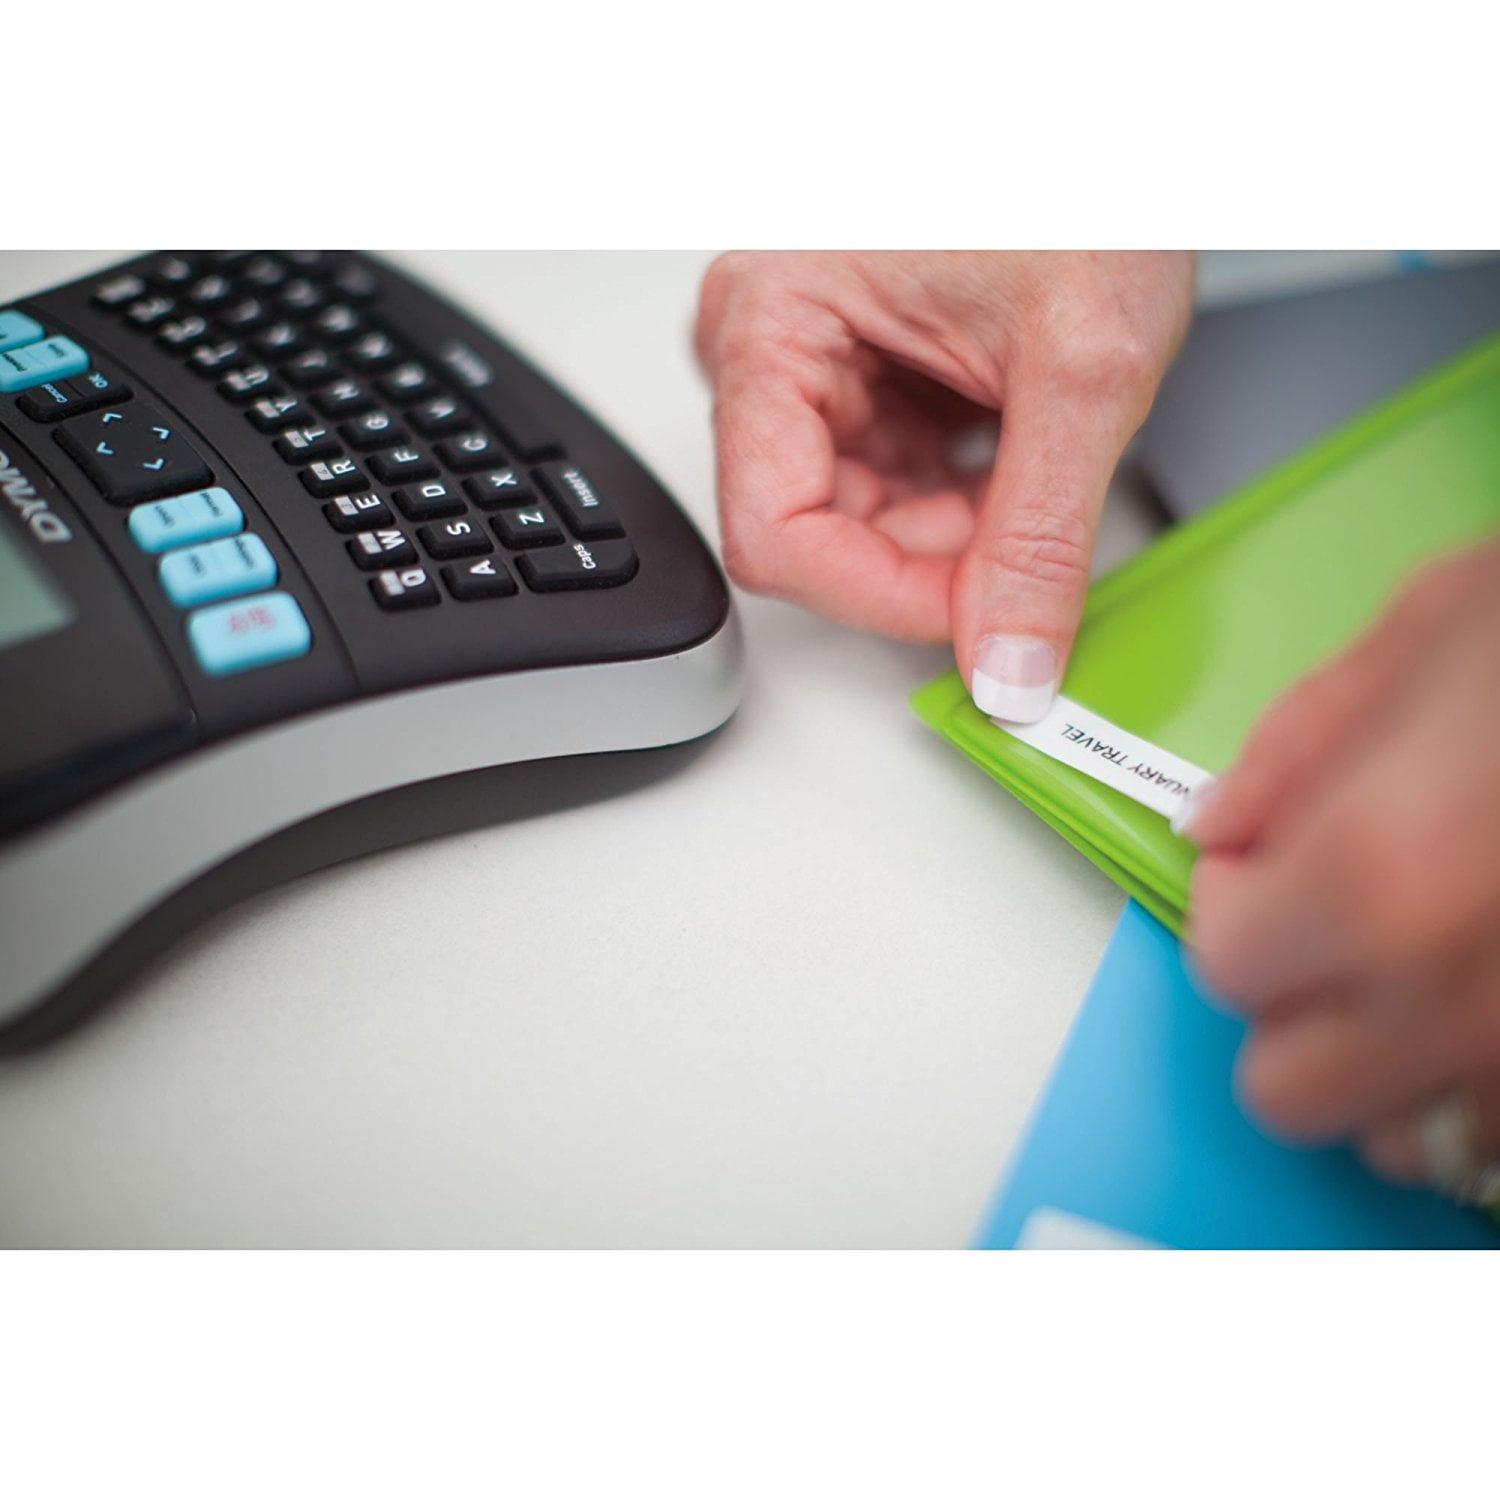 DYMO LabelManager 210D All Purpose Label Maker with Large Display and QWERTY Keyboard 1738345